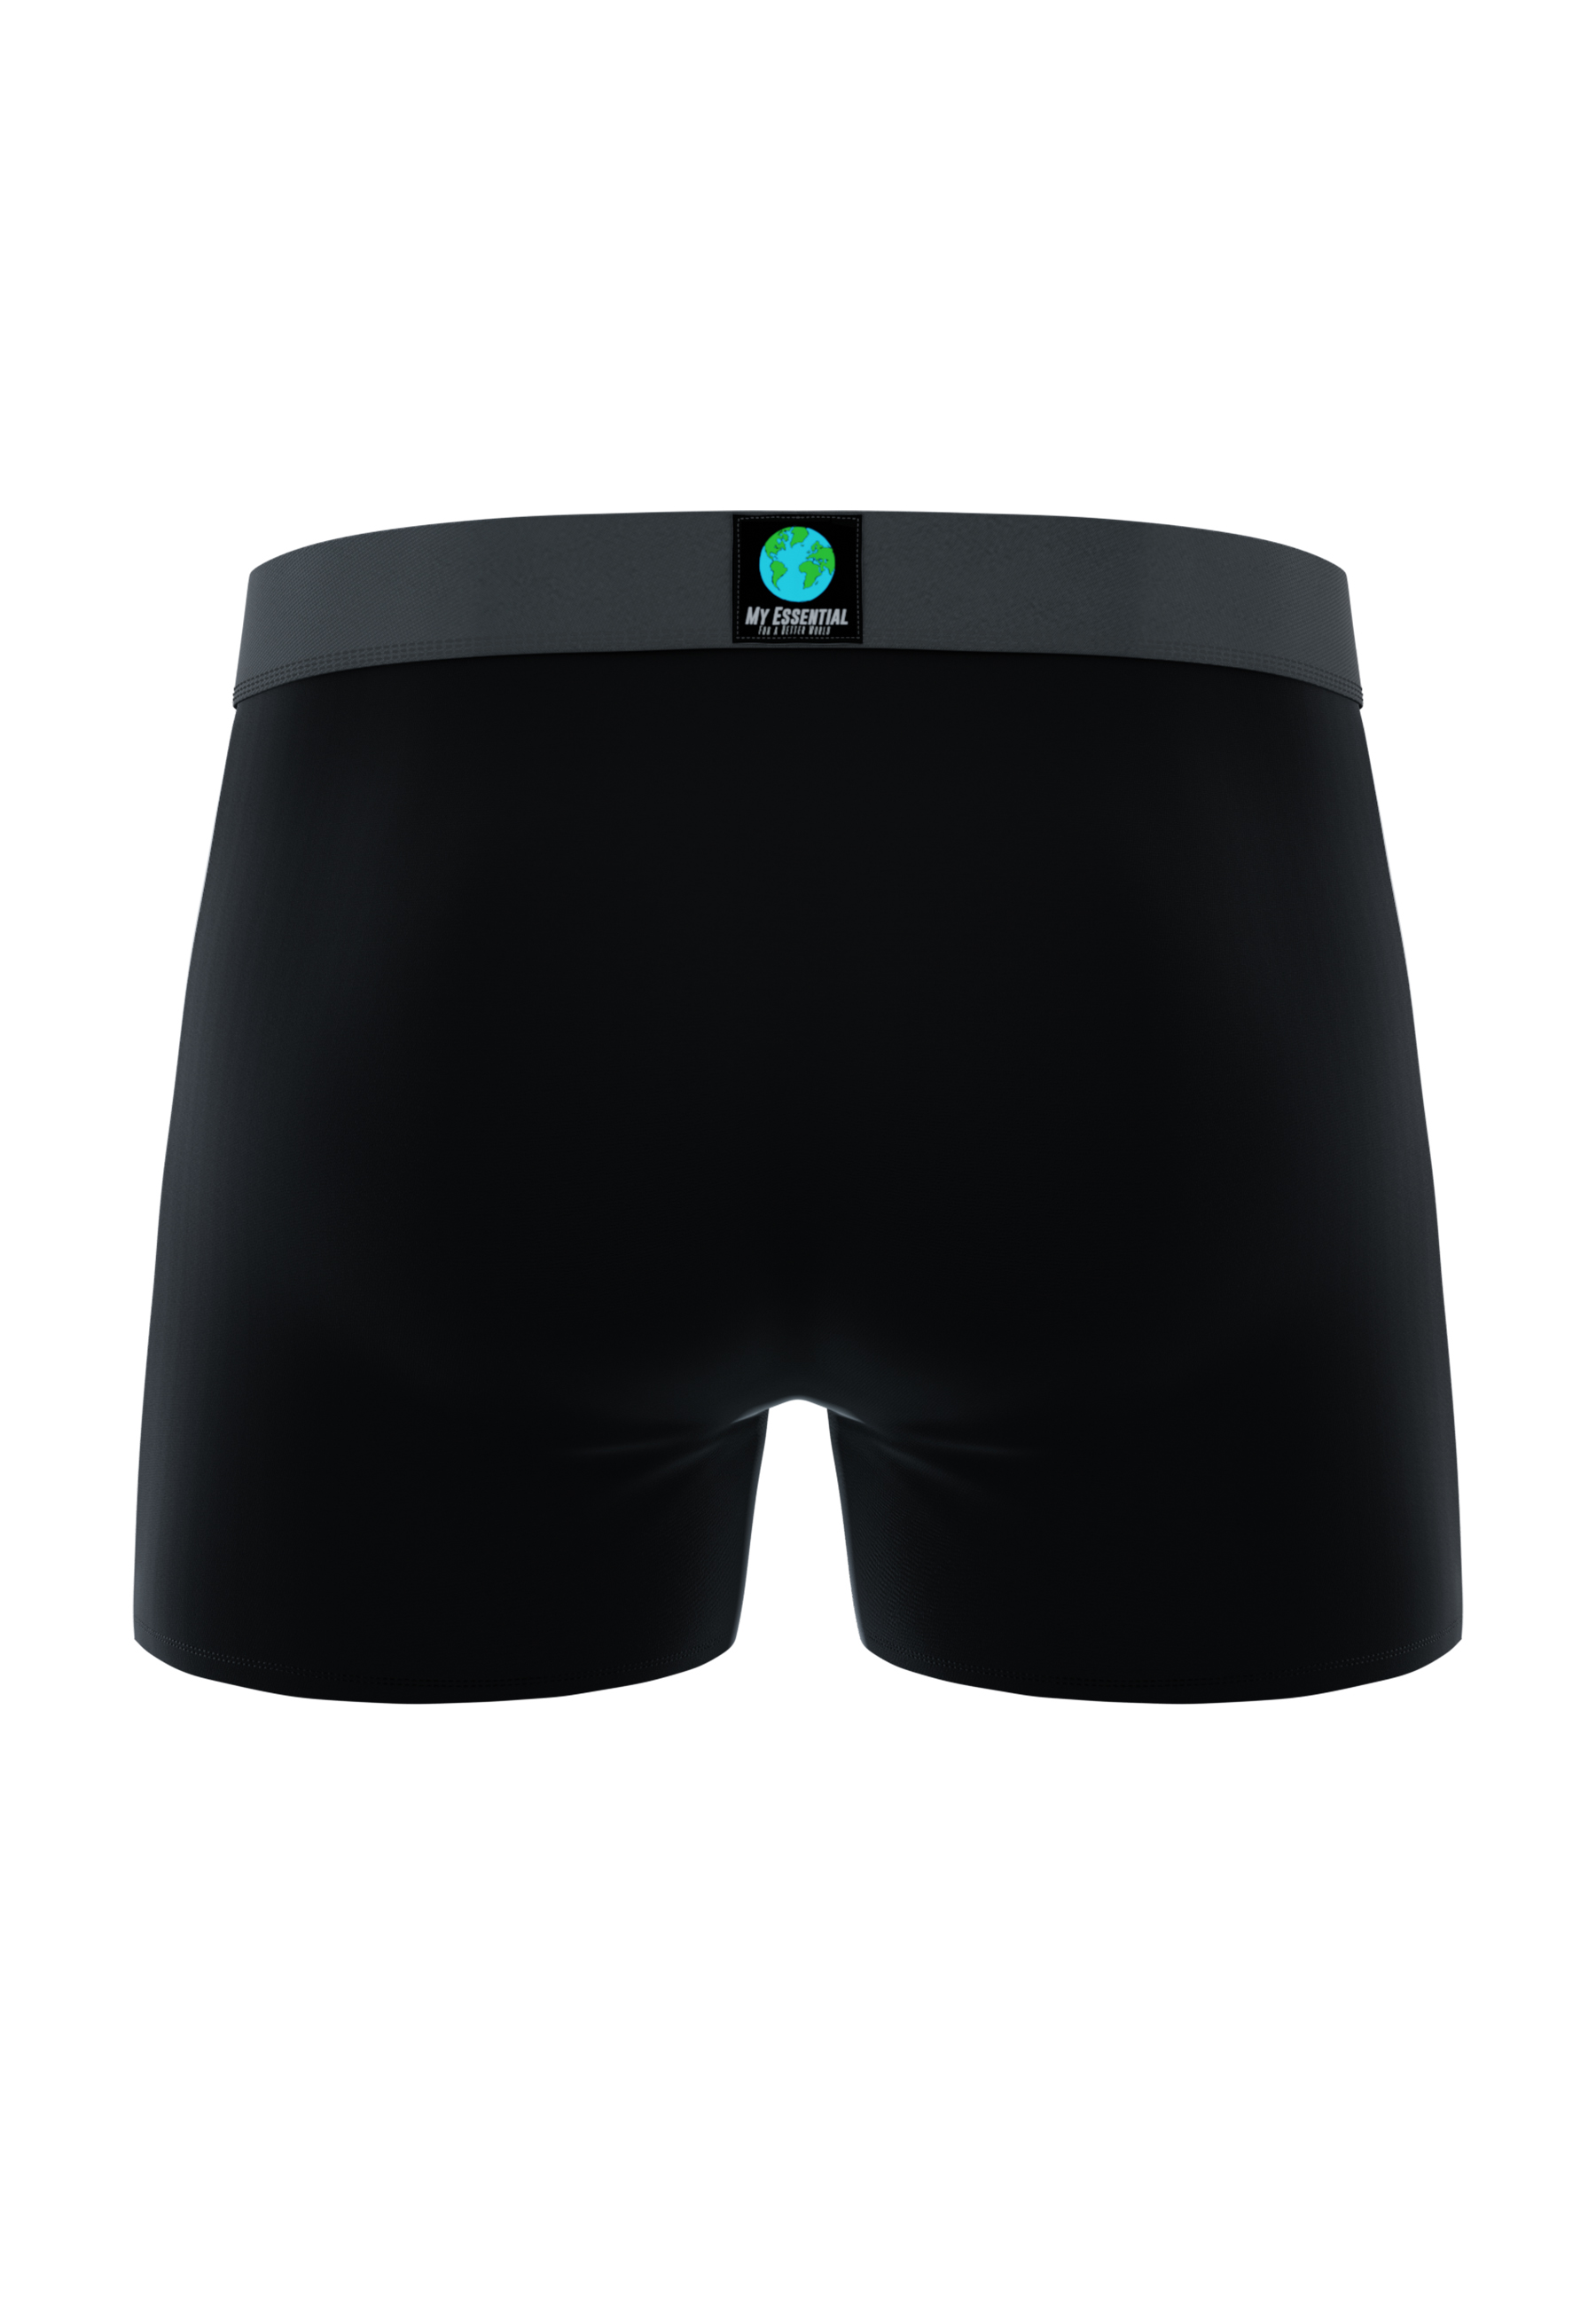 MY ESSENTIAL CLOTHING 3-Pack Boxershorts all black XXL